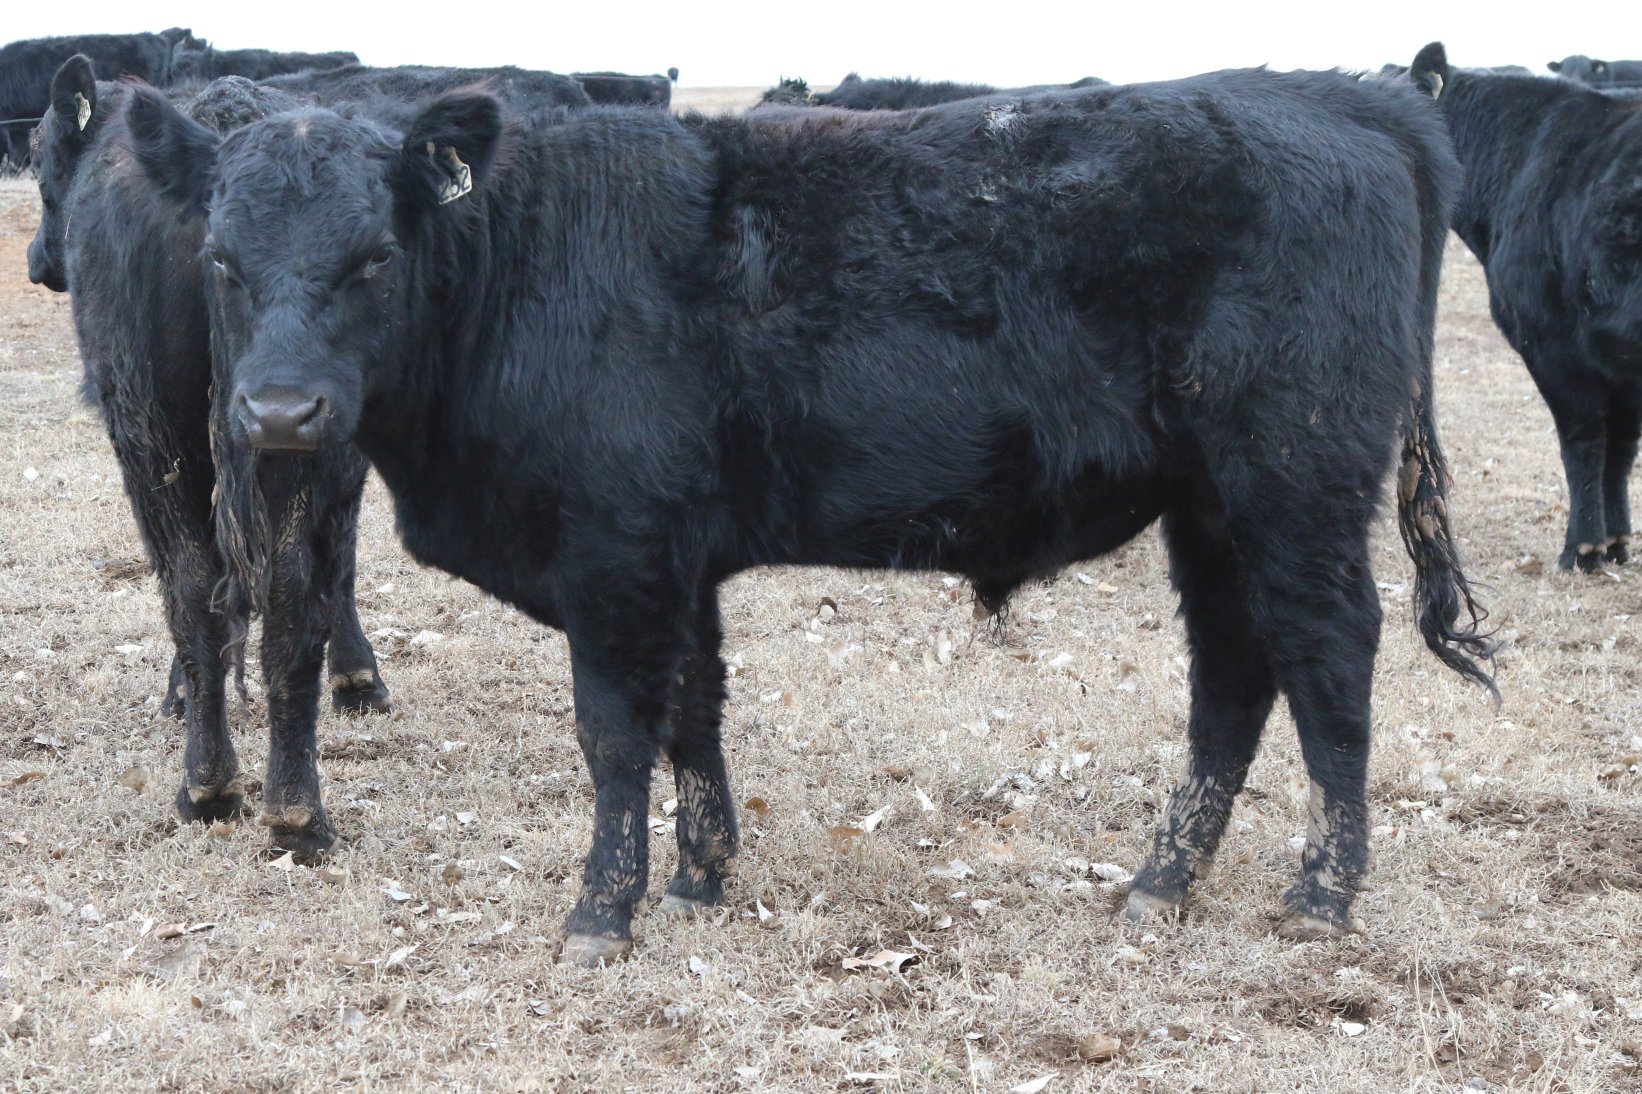 Registered Angus Bulls - 2 year olds